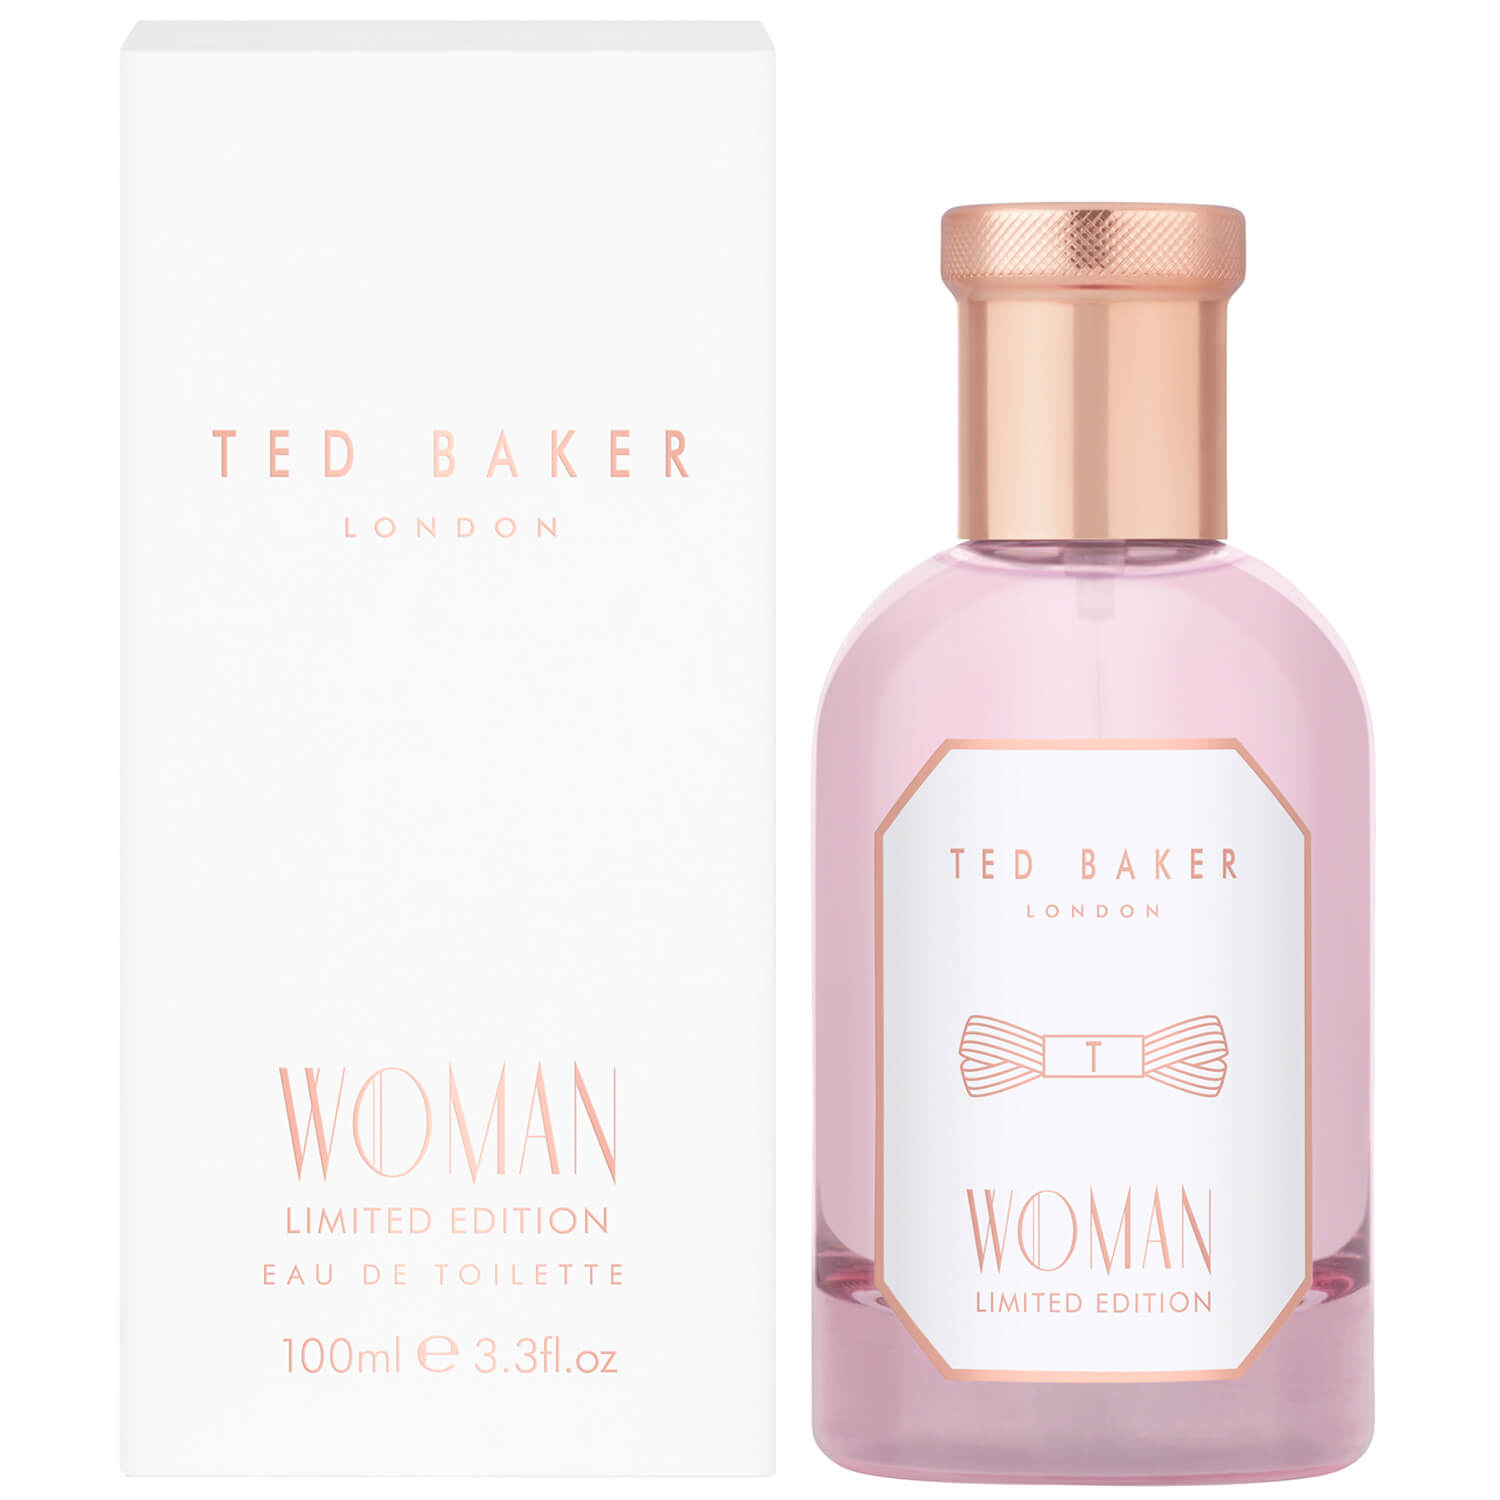 Ted Baker ‘Woman’ Limited Edition Perfume - 100ml 1 Shaws Department Stores